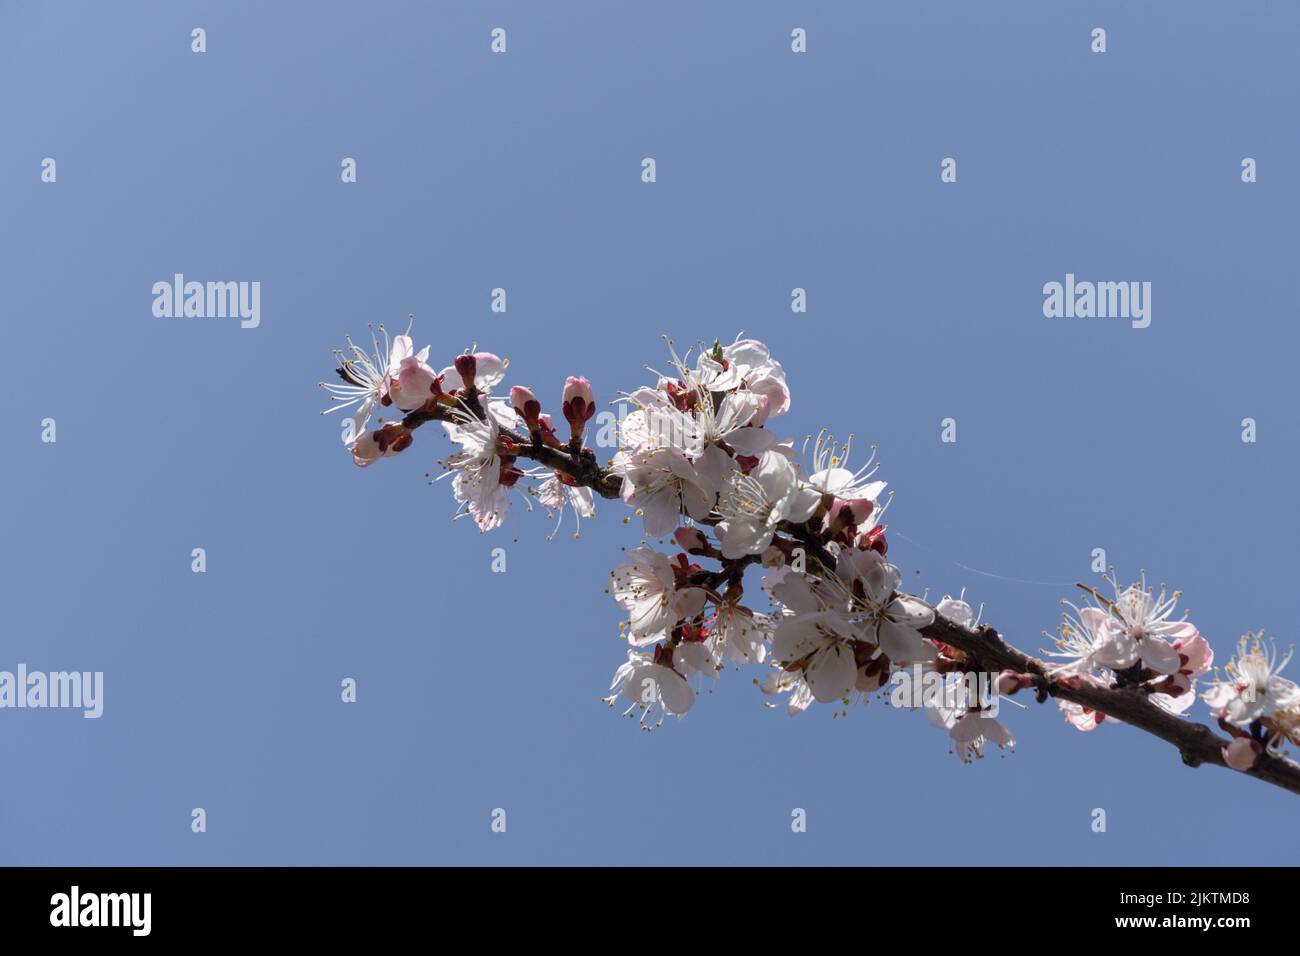 A closeup of the branch of an apricot tree with white flowers gainst the blue sky. Stock Photo